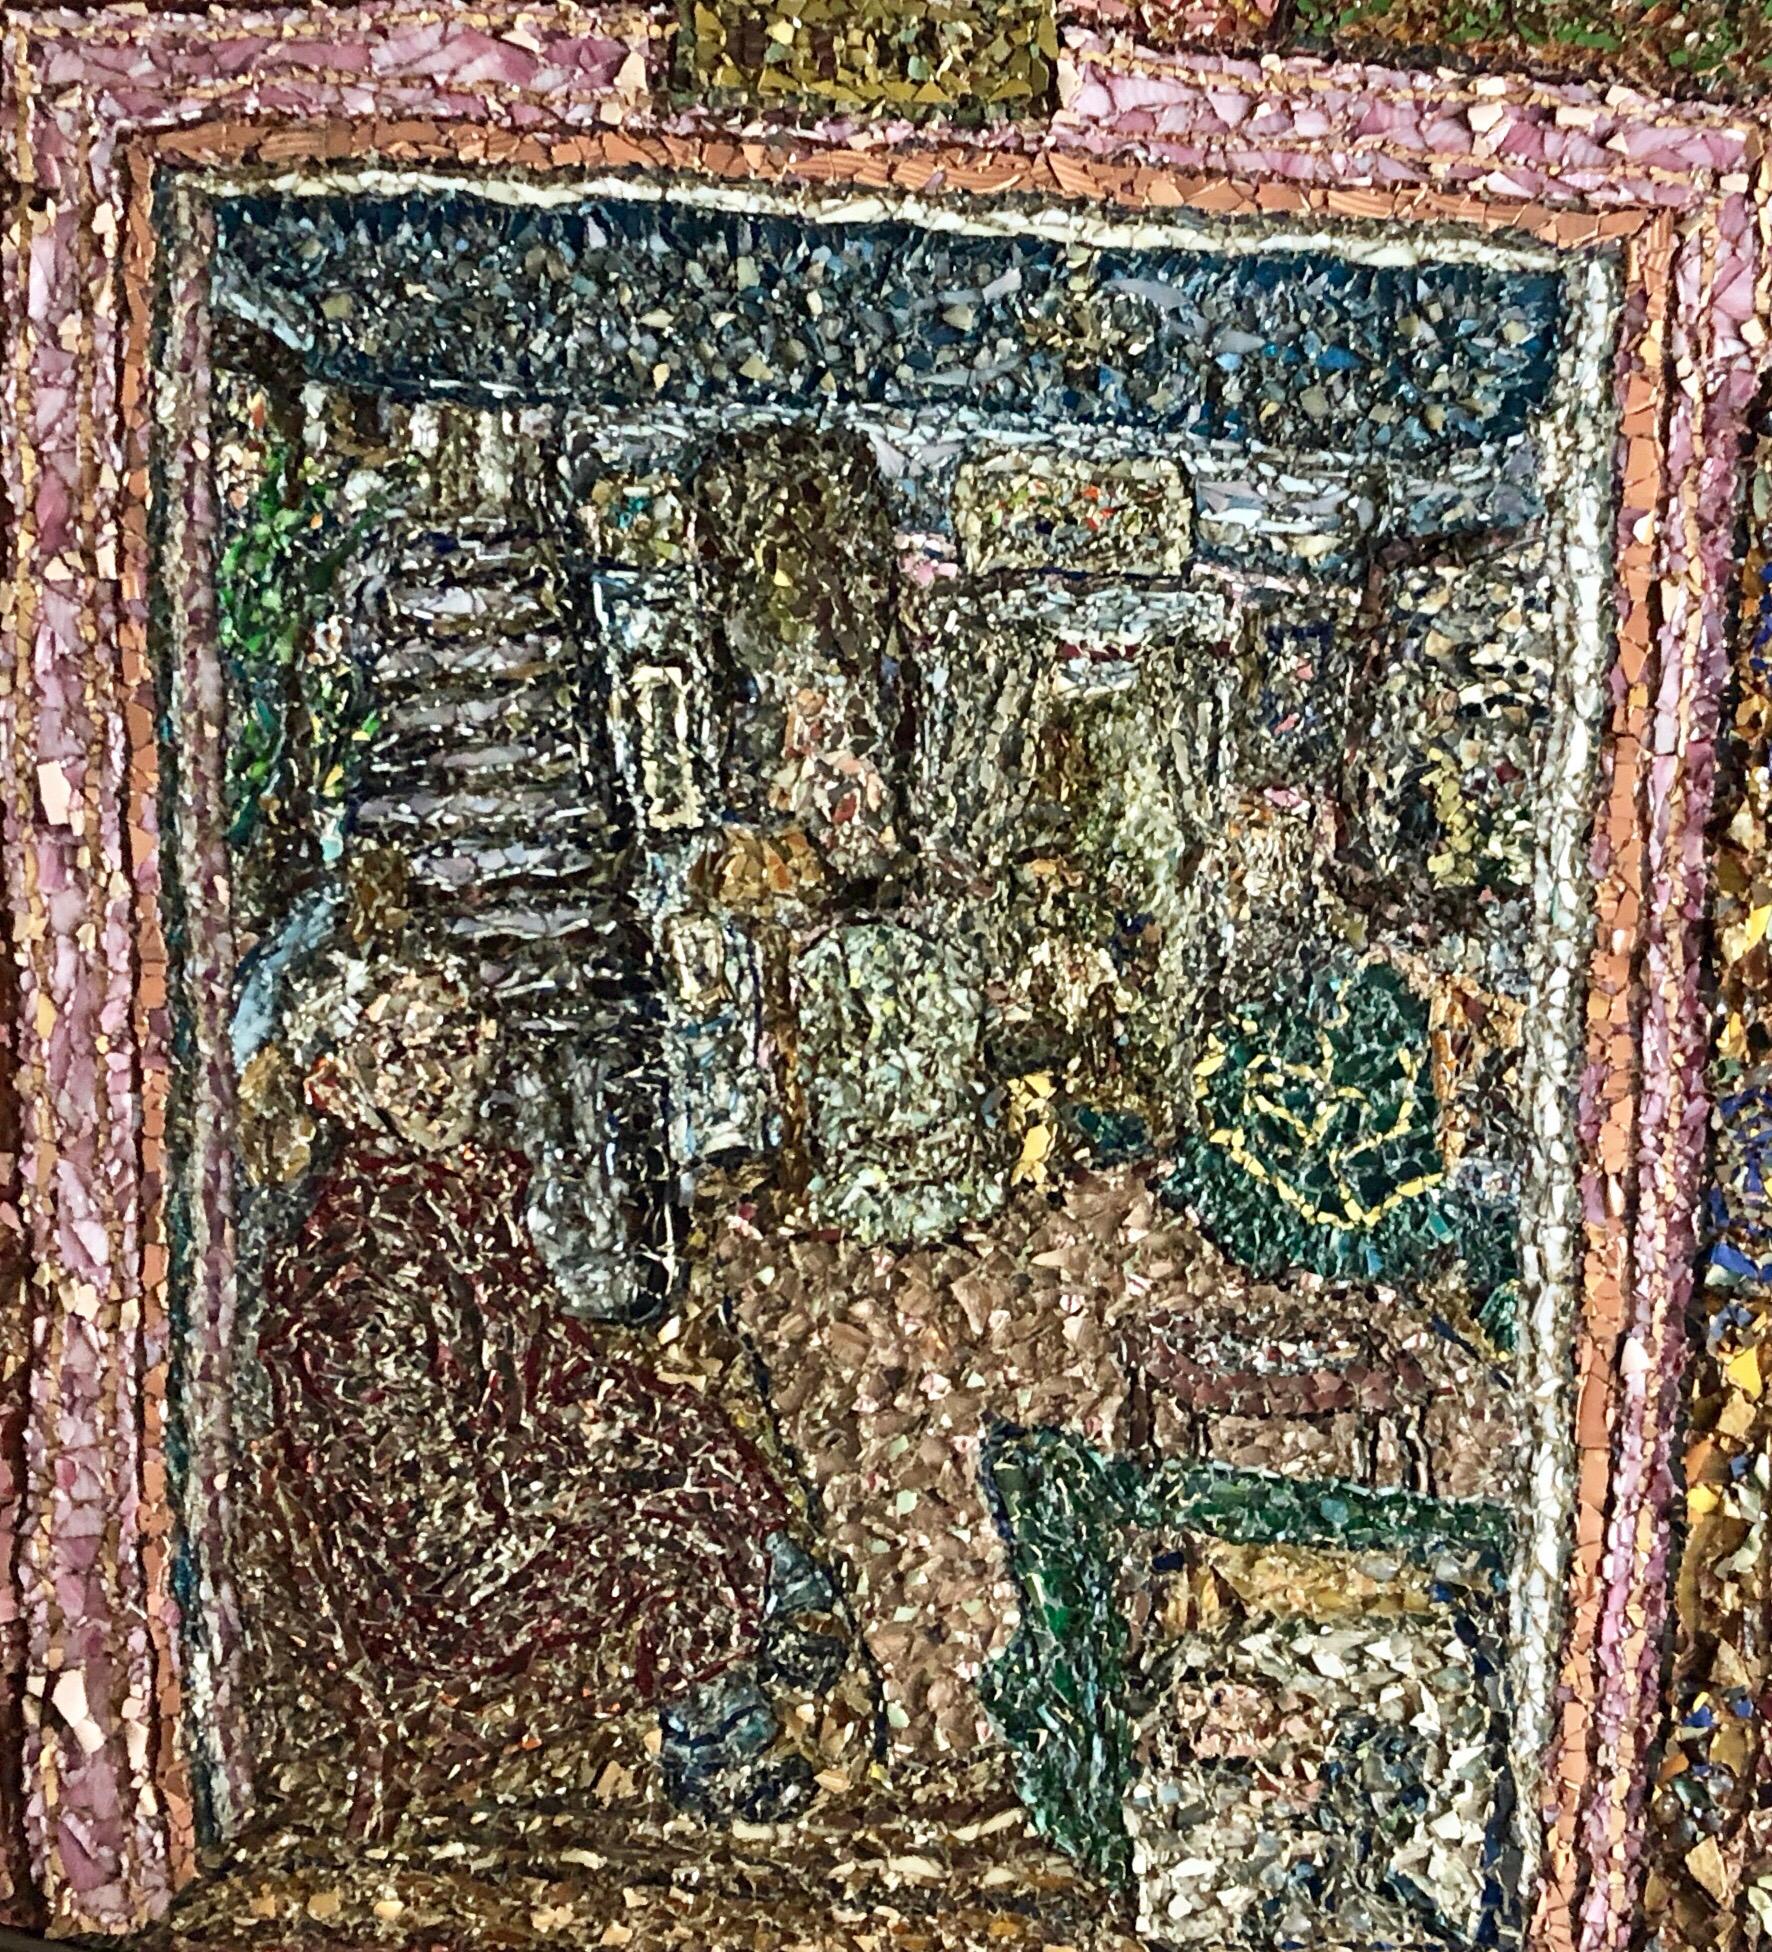 Titled: Pop (Samuel Rothbort) in our living room.
Bears estate stamp of his father, famed American folk artist Samuel Rothbort. one of only about 10 in total large scale mosaics that he did, each one took many months. very complicated intricate work